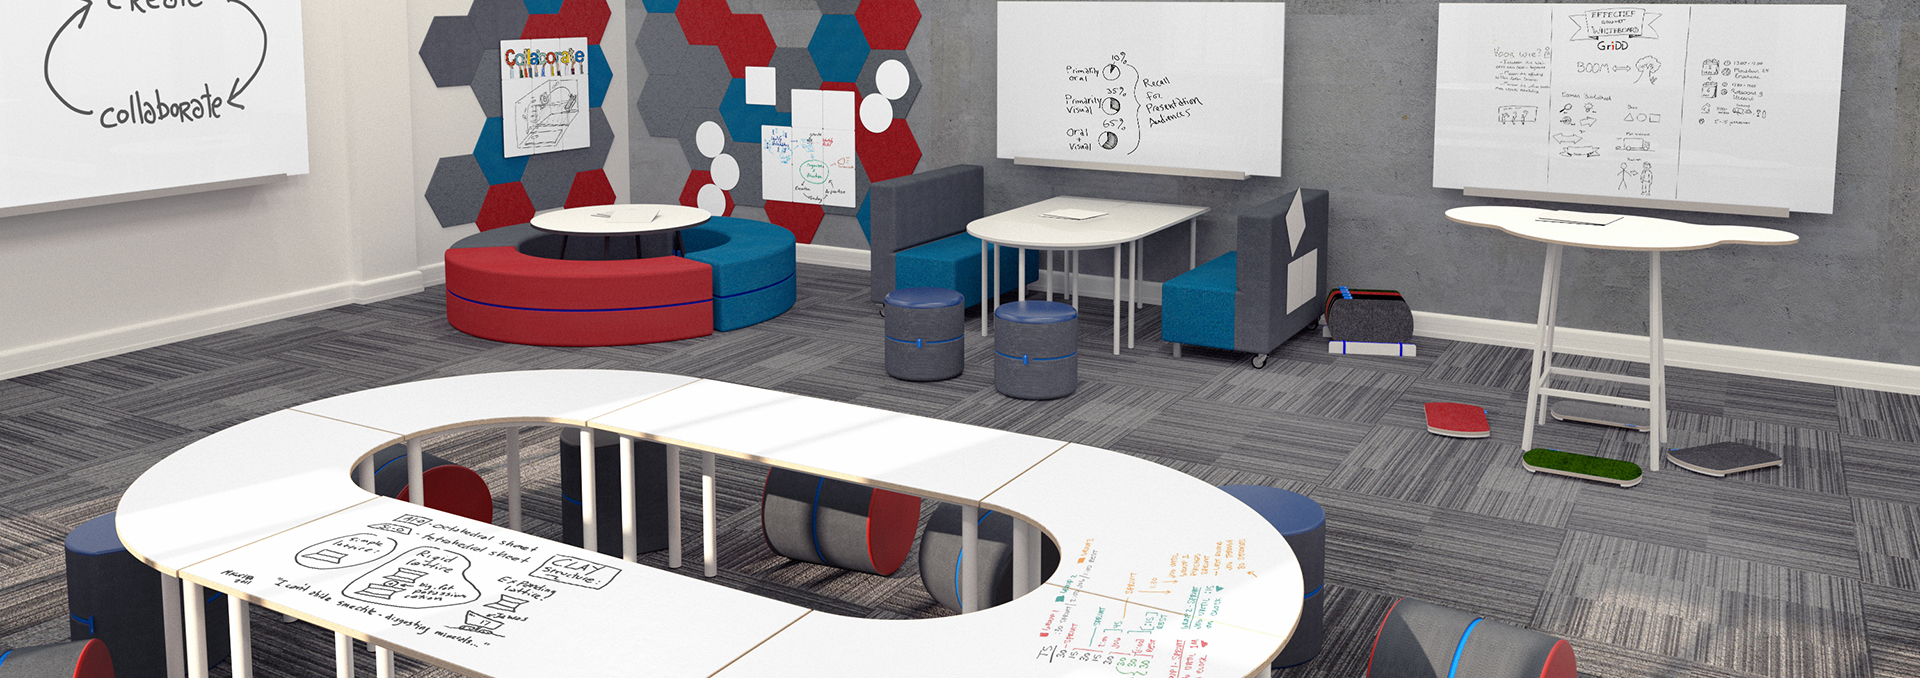 TestCollaborative Learning Space NorvaNivel